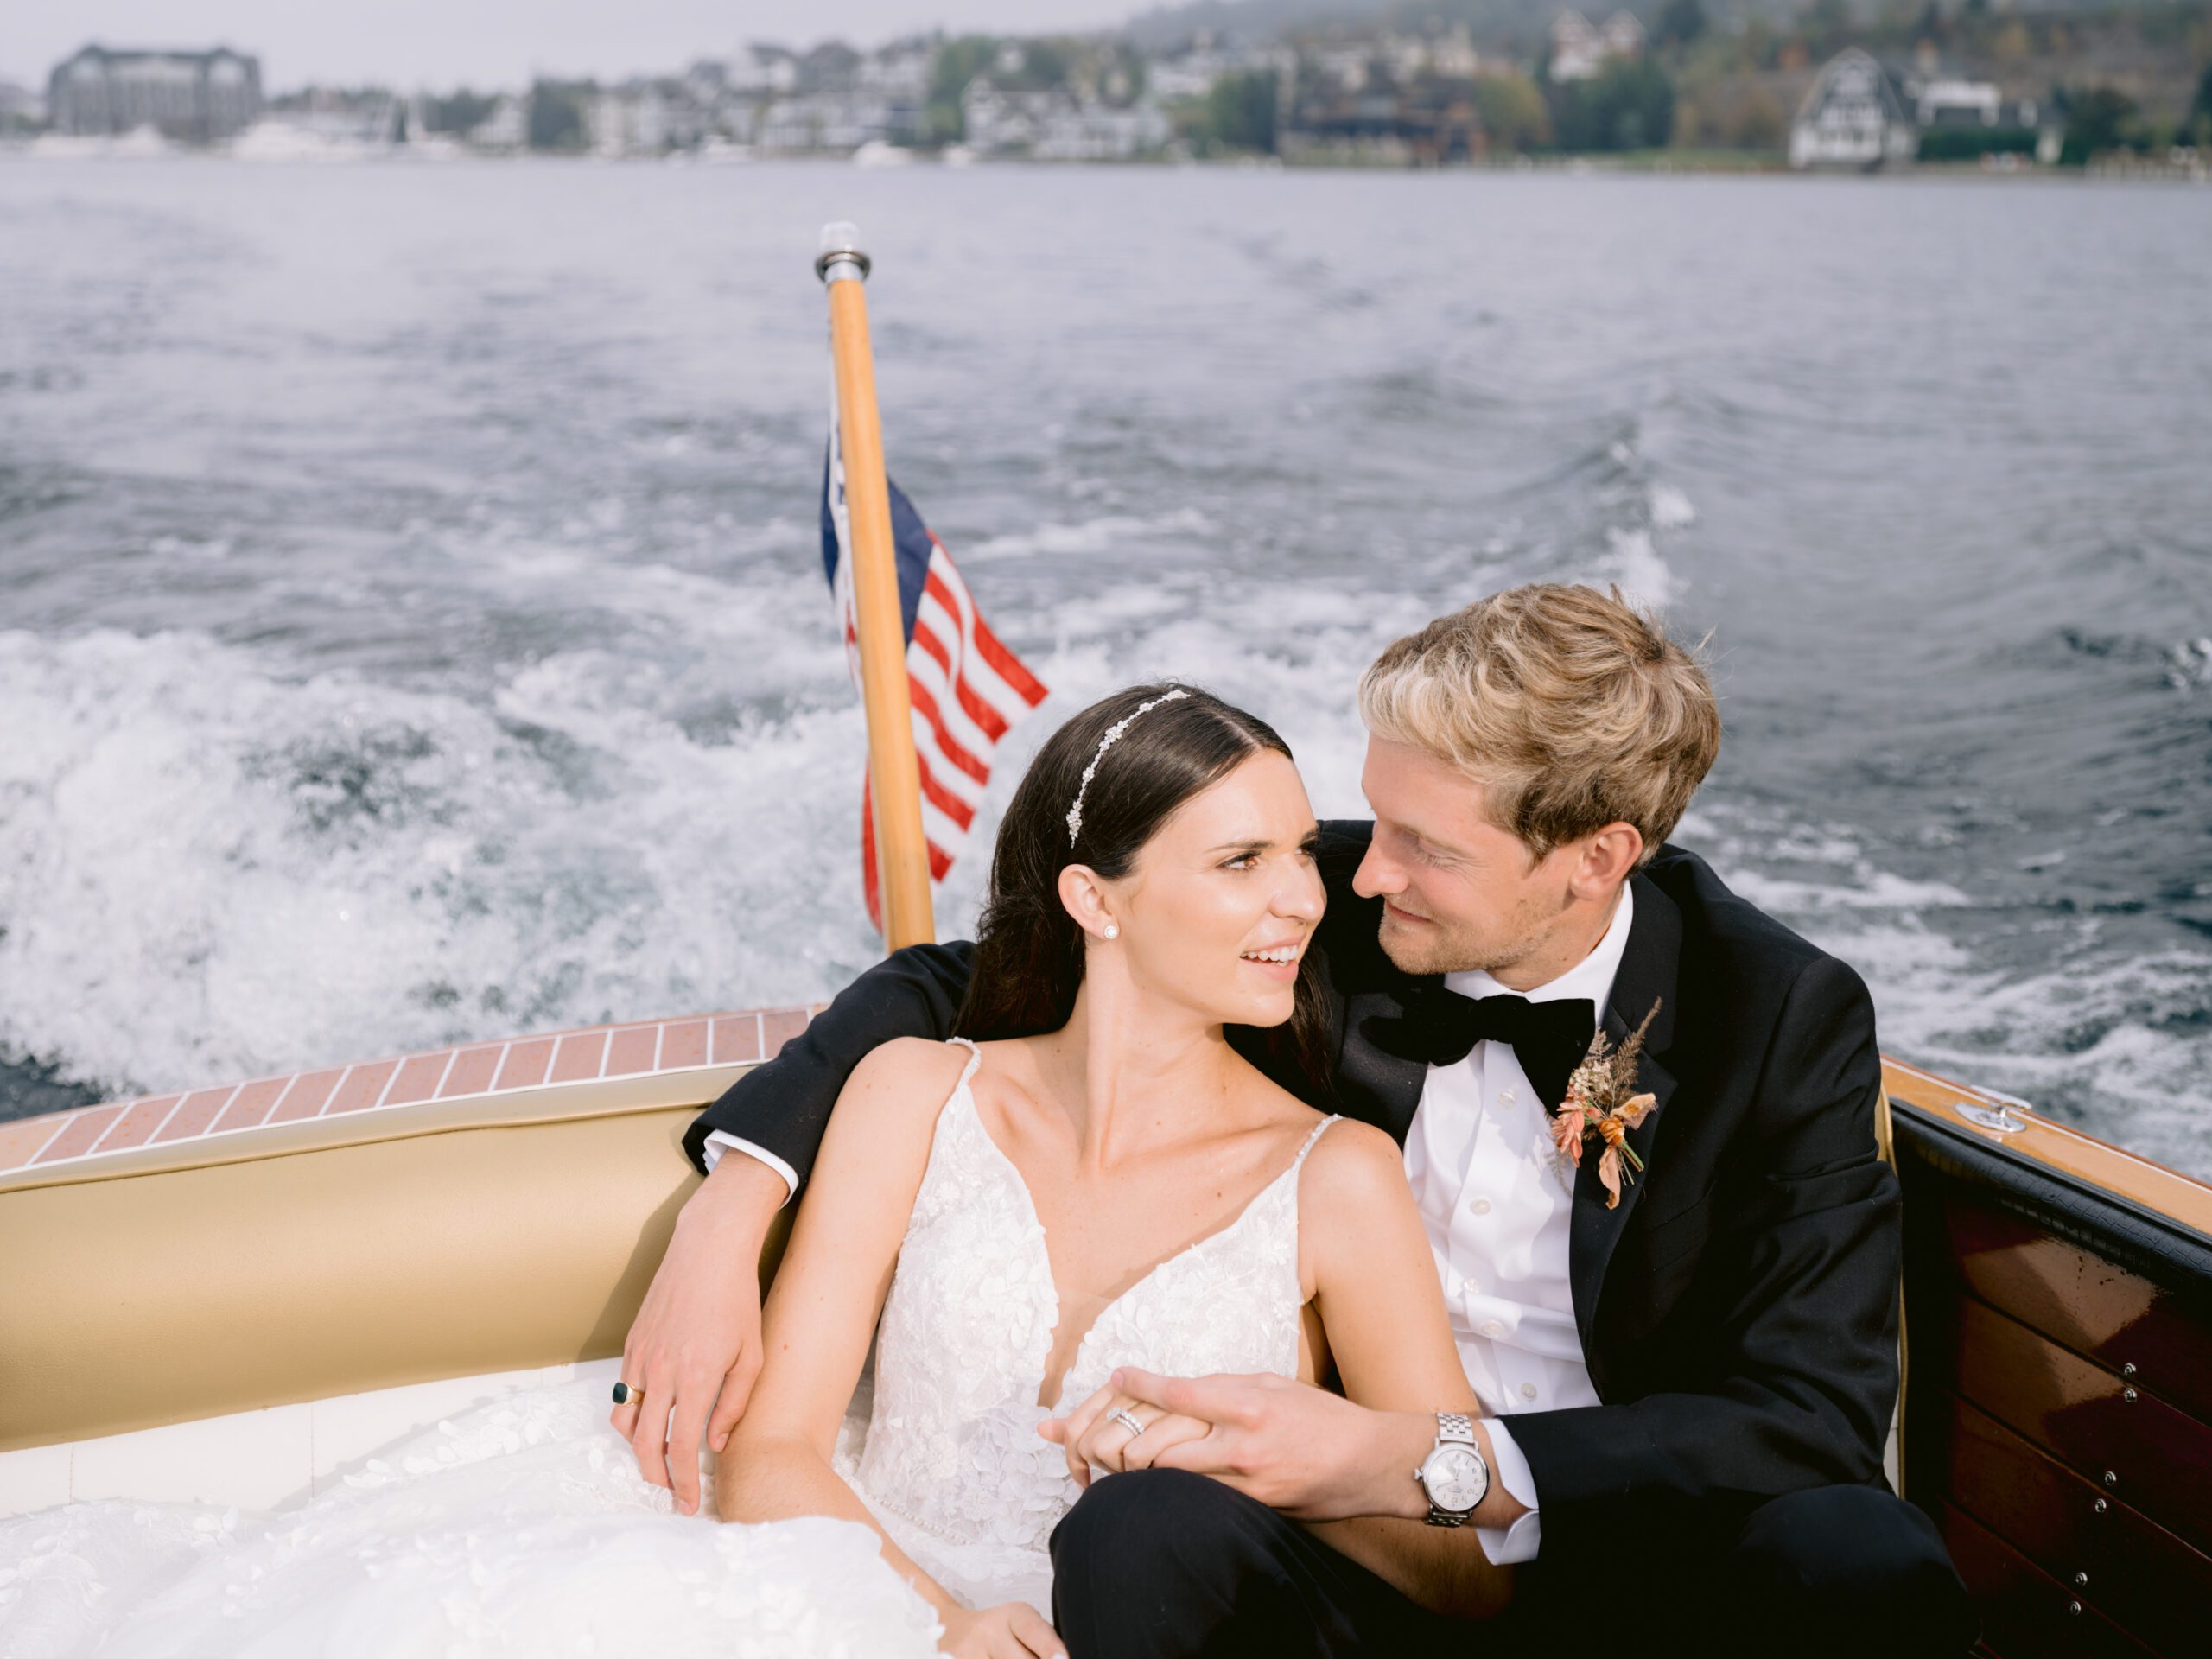 A bride and groom get cozy on a Lake Michigan boat ride